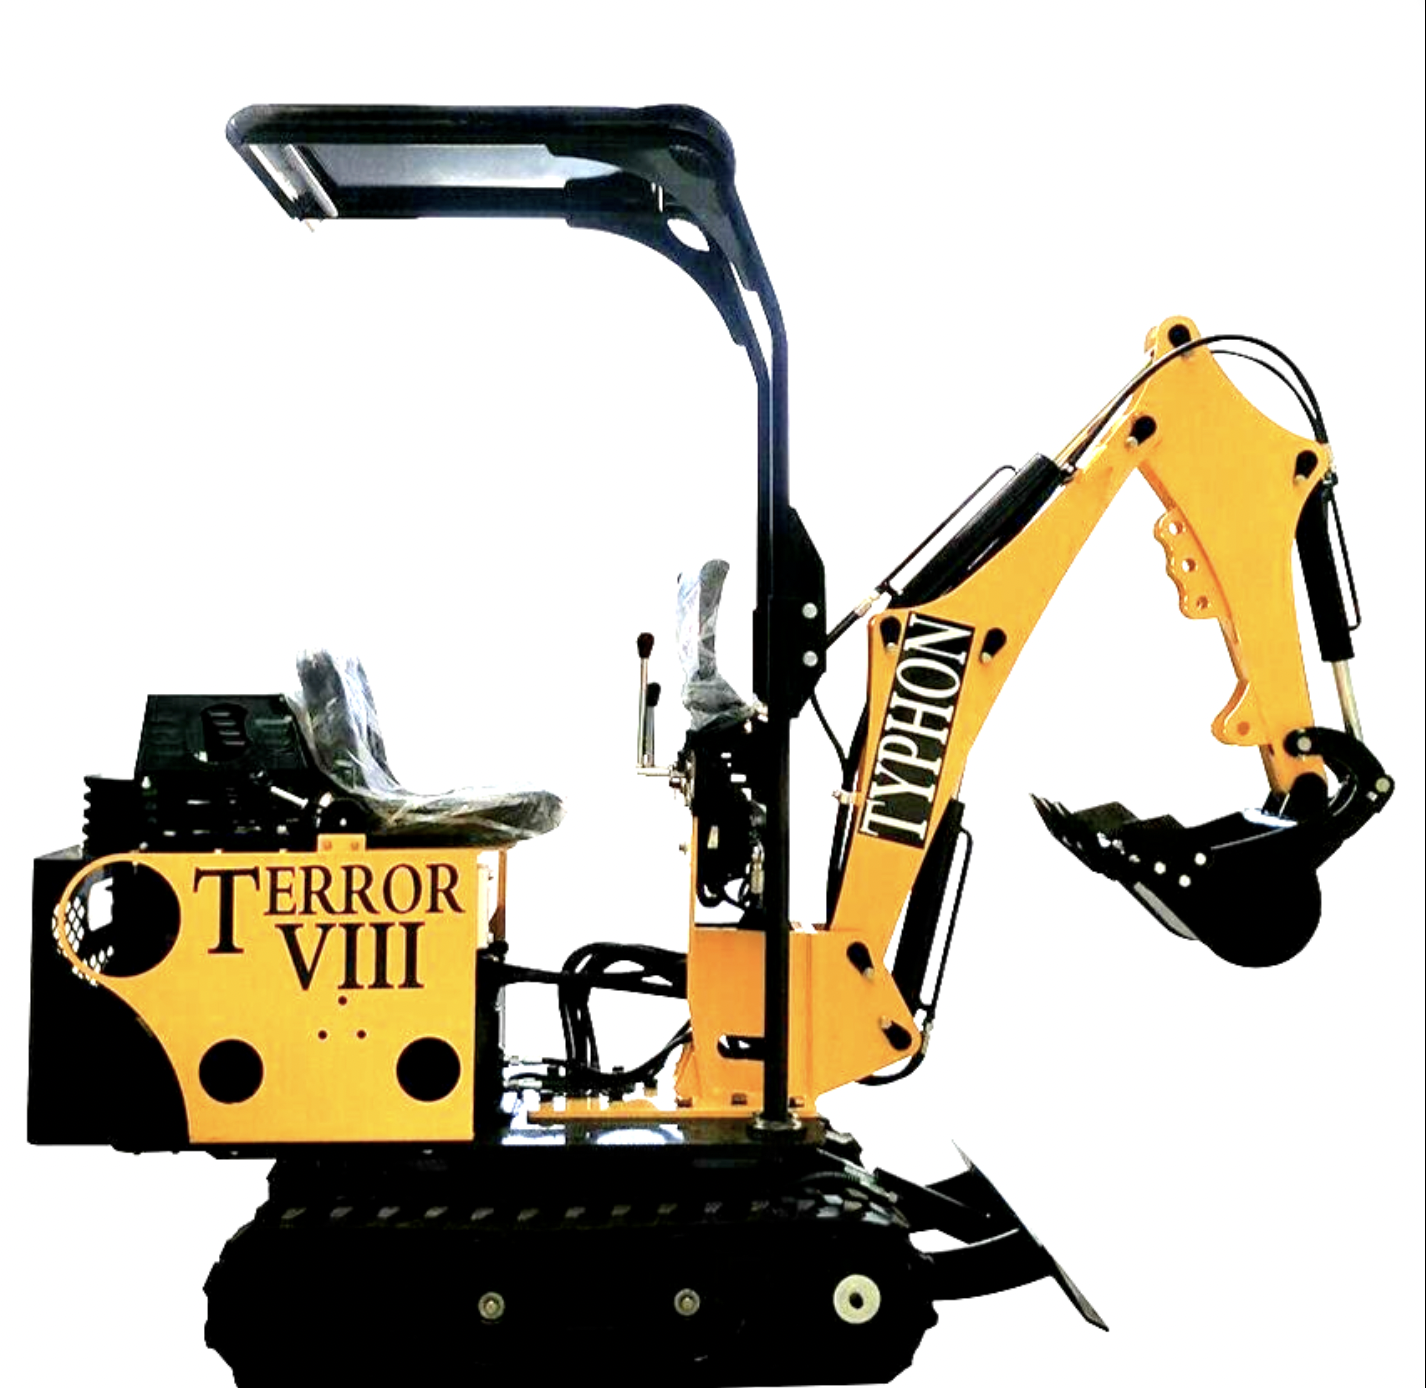 Construction machinery for landscaping farming